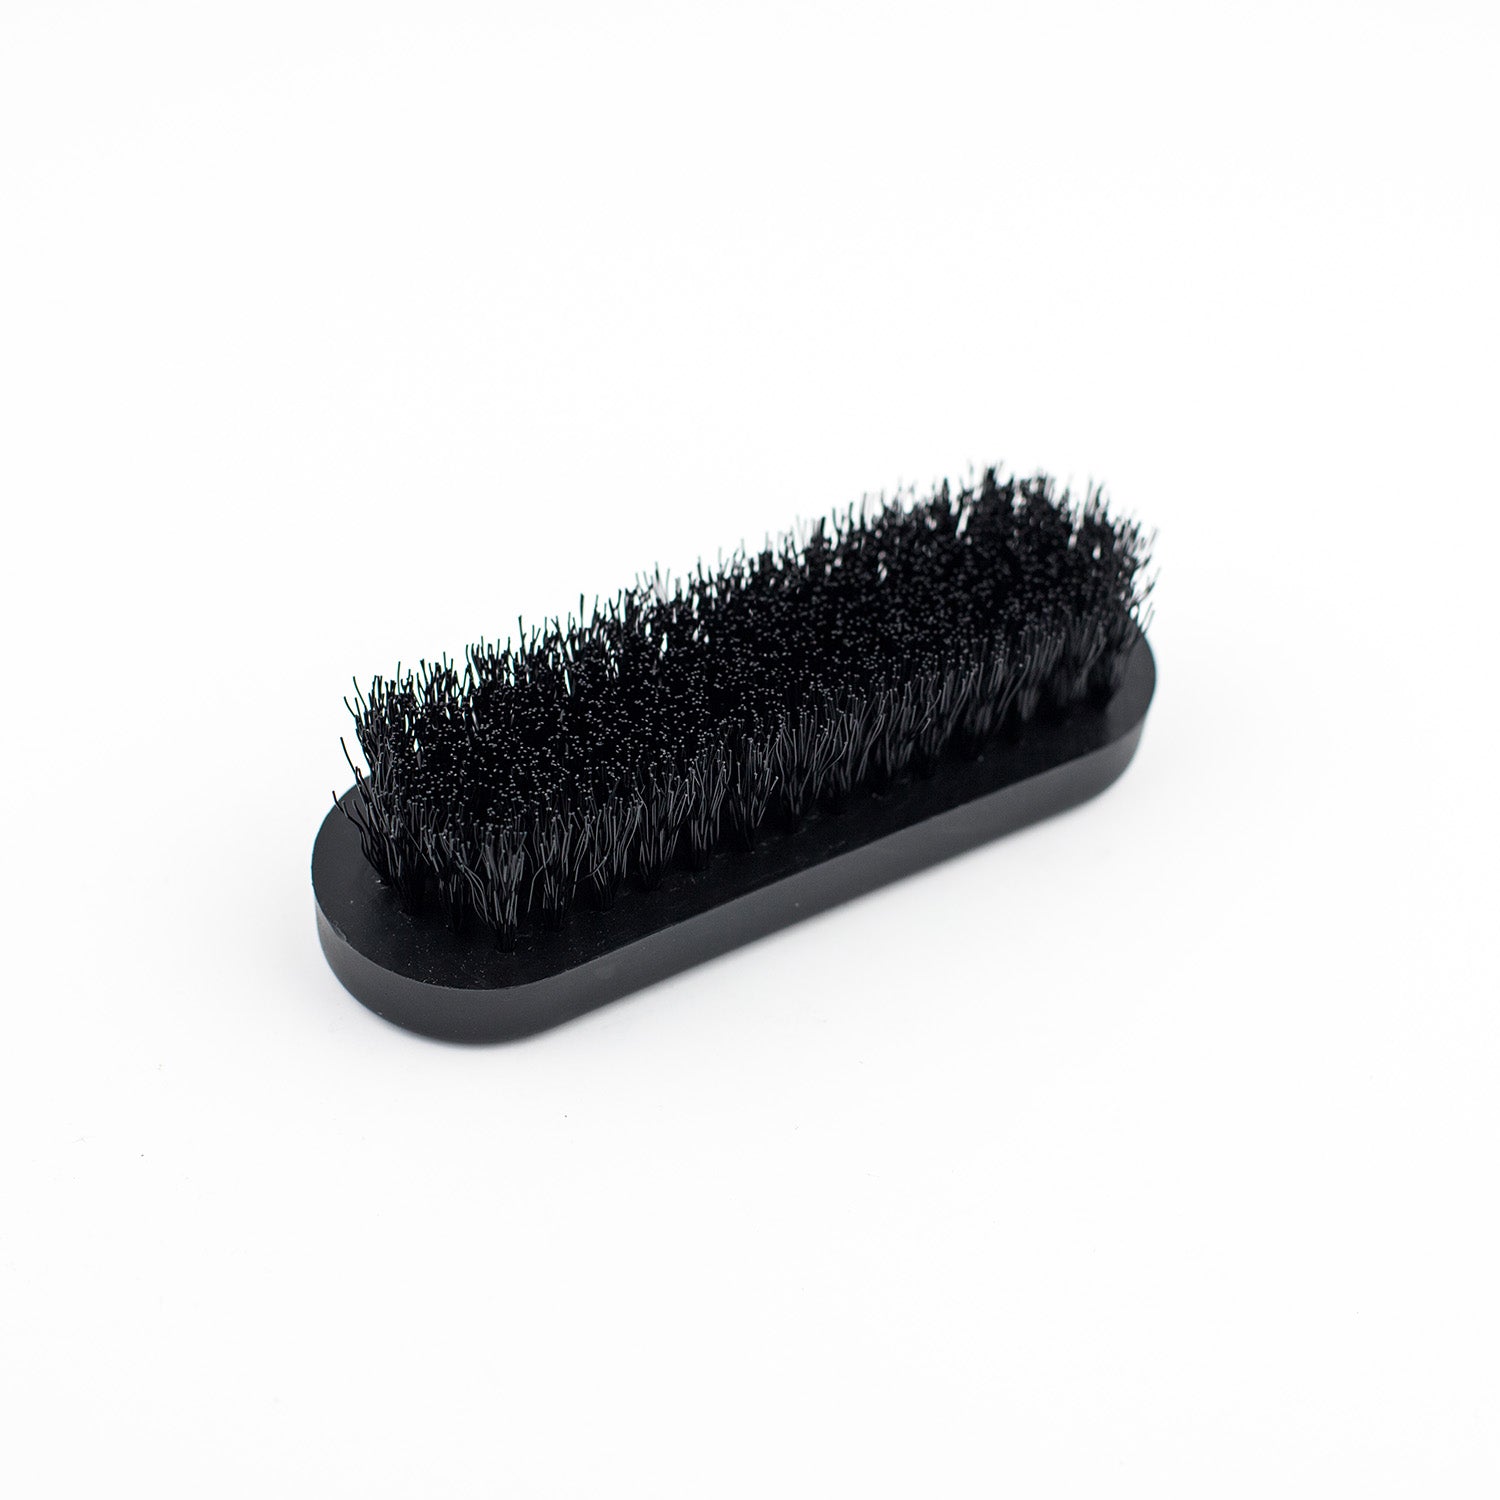 Sneaky Brush -Trainer and Shoe Cleaning Brush